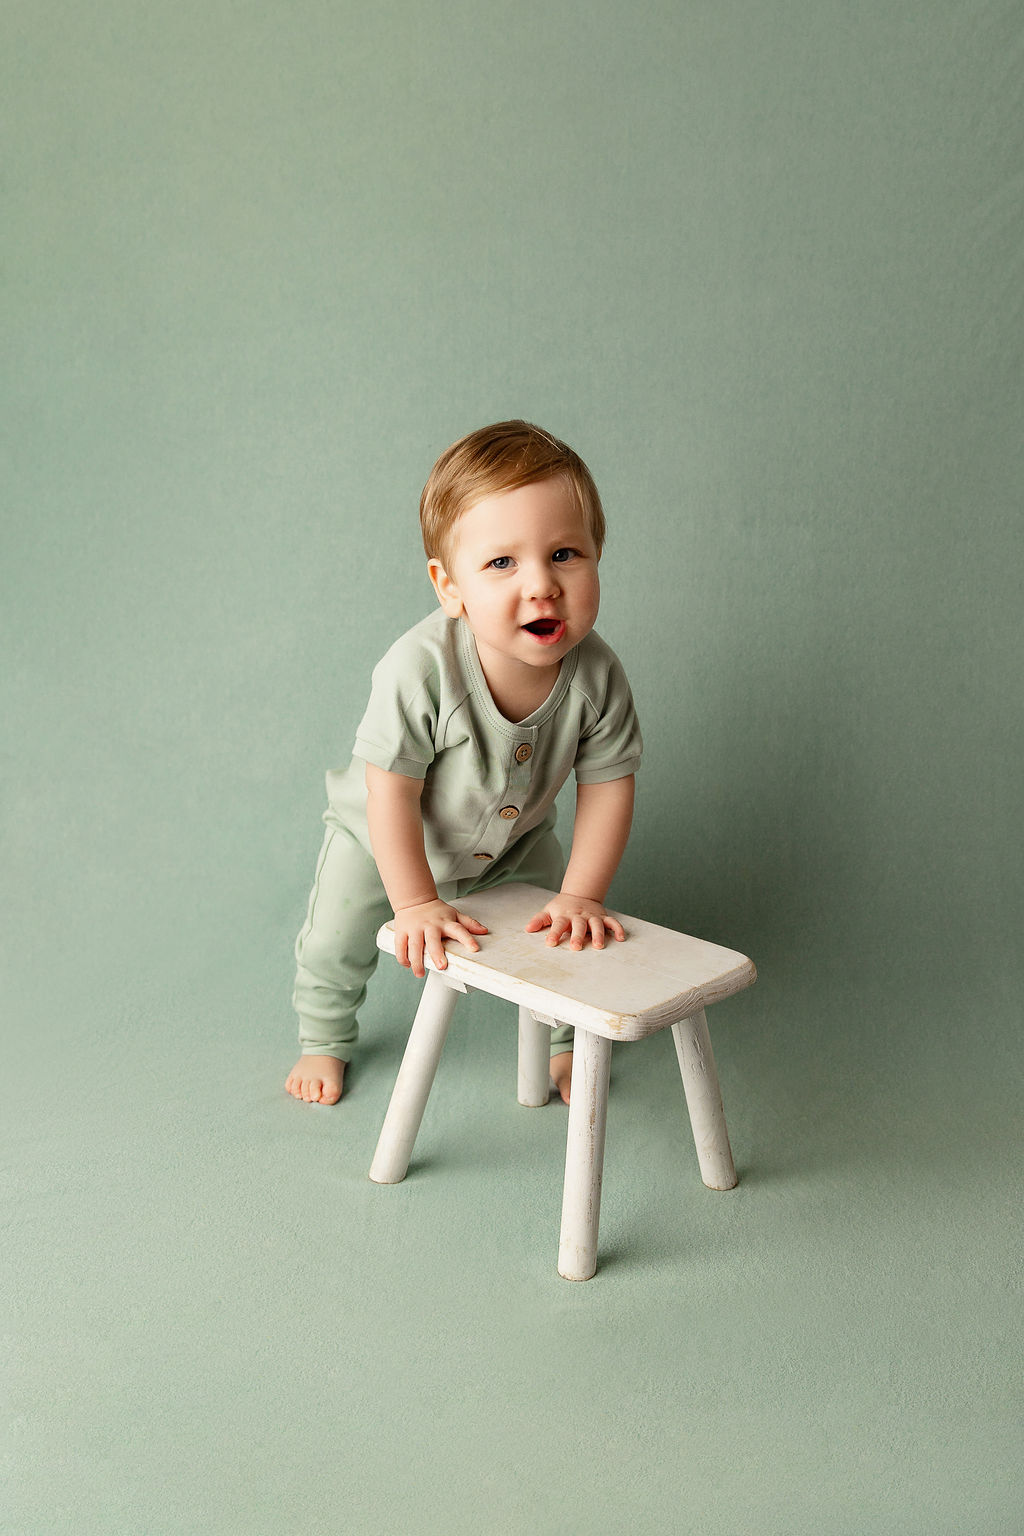 A toddler boy smiles while playing with a small wooden stool in a green onesie after visiting milwaukee daycare